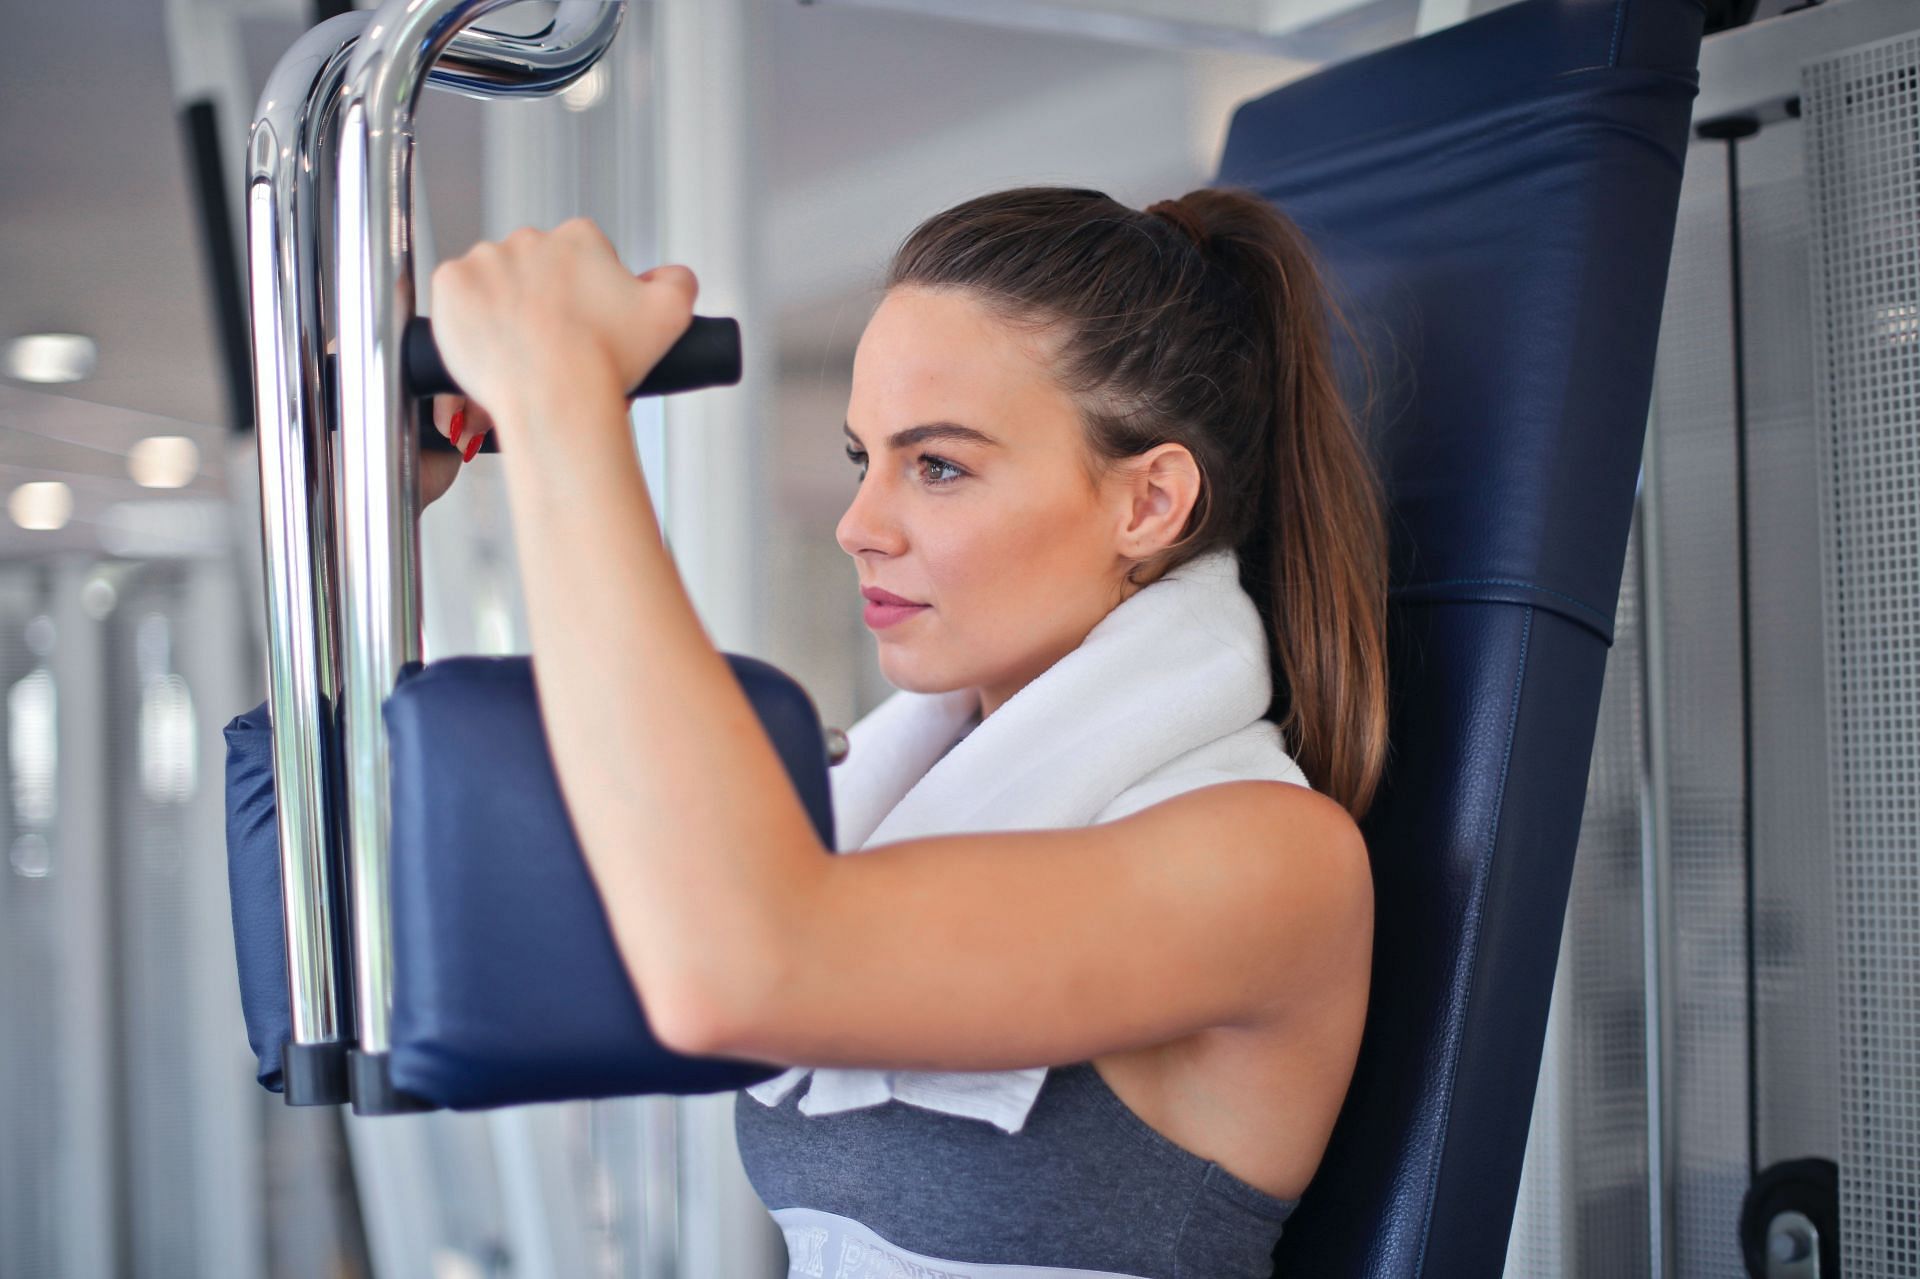 Arm slimming exercises can help you lose that extra flab (Image via Pexels @Andrea Piacquadio)